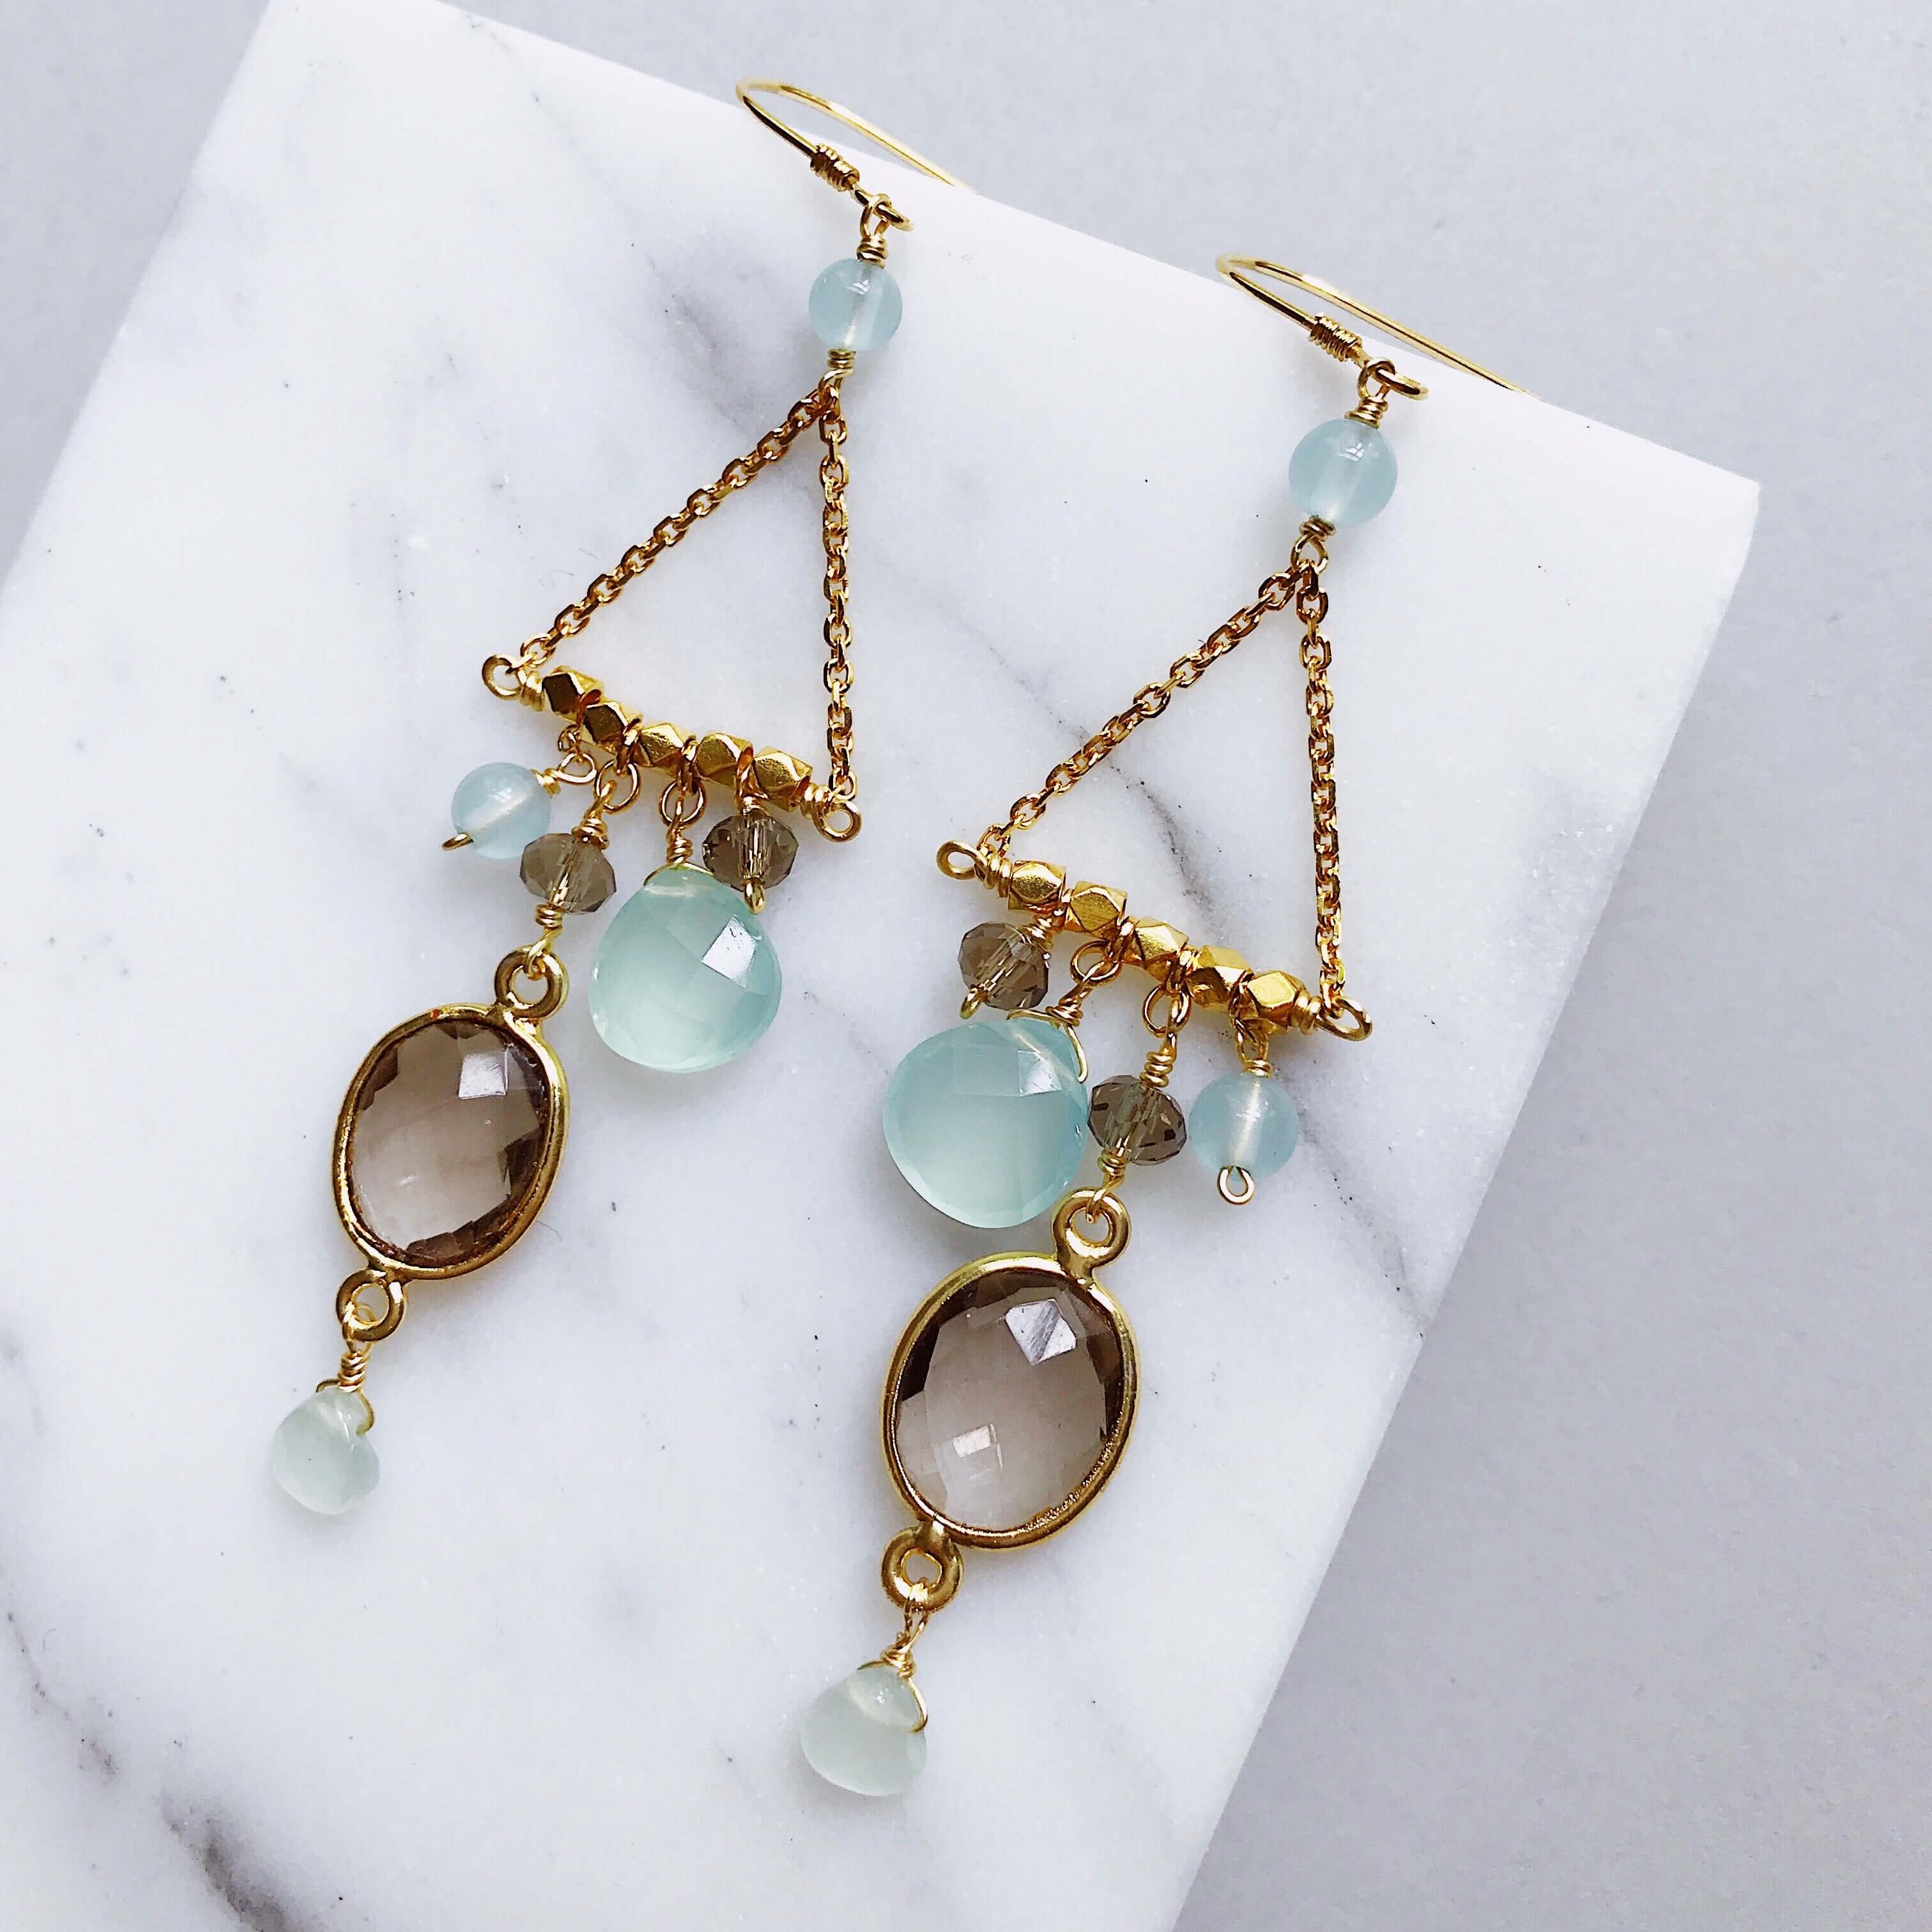 French Hooks, bezel set smoky quartz gemstones surrounded by a variety of faceted aqua chalcedony accent stones Gold pair of Earrings